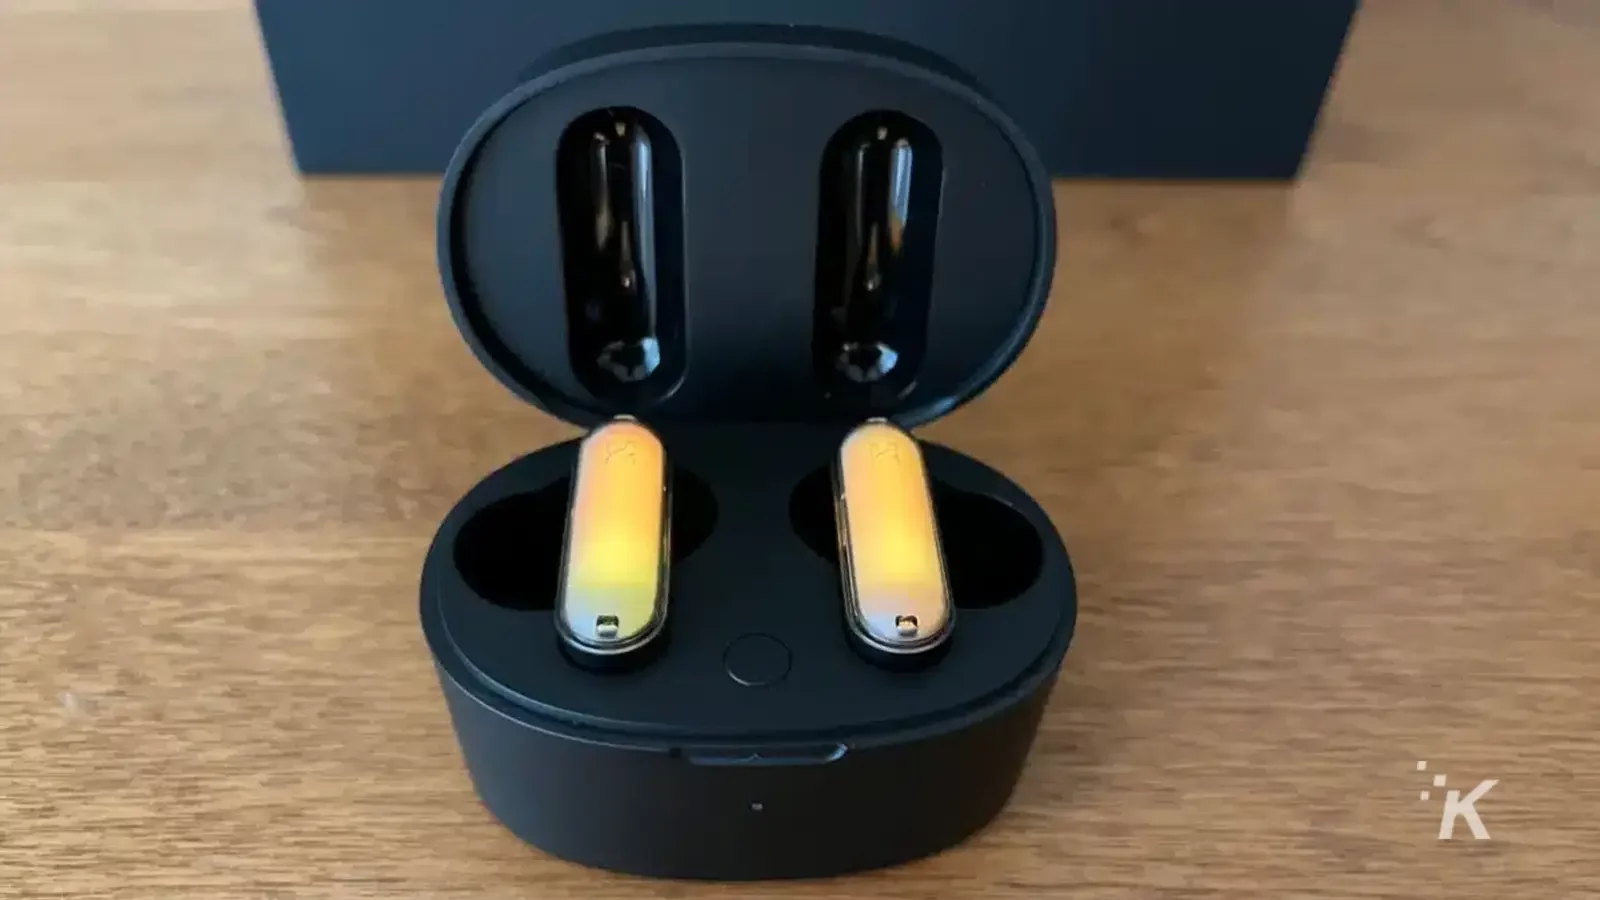 GPods earbuds in case on wooden table glowing yellow